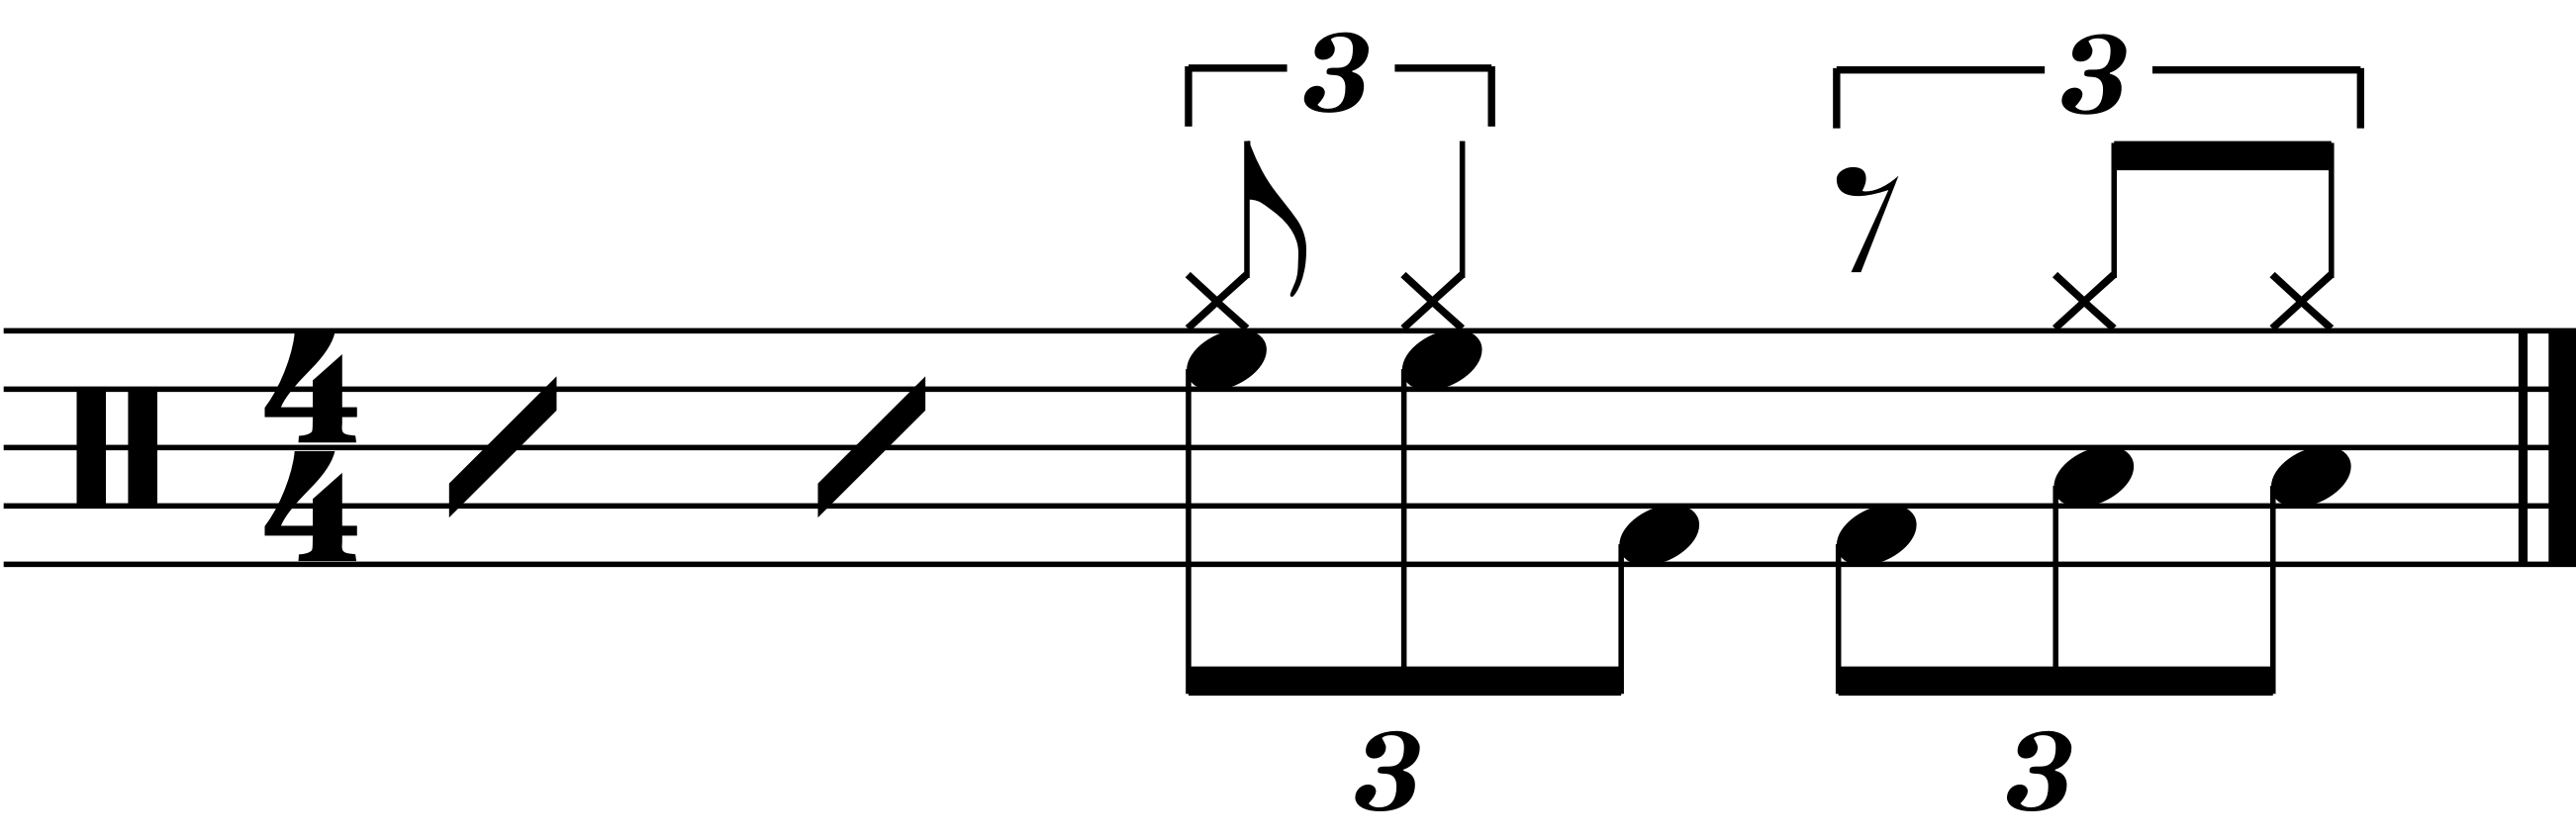 A free fill example